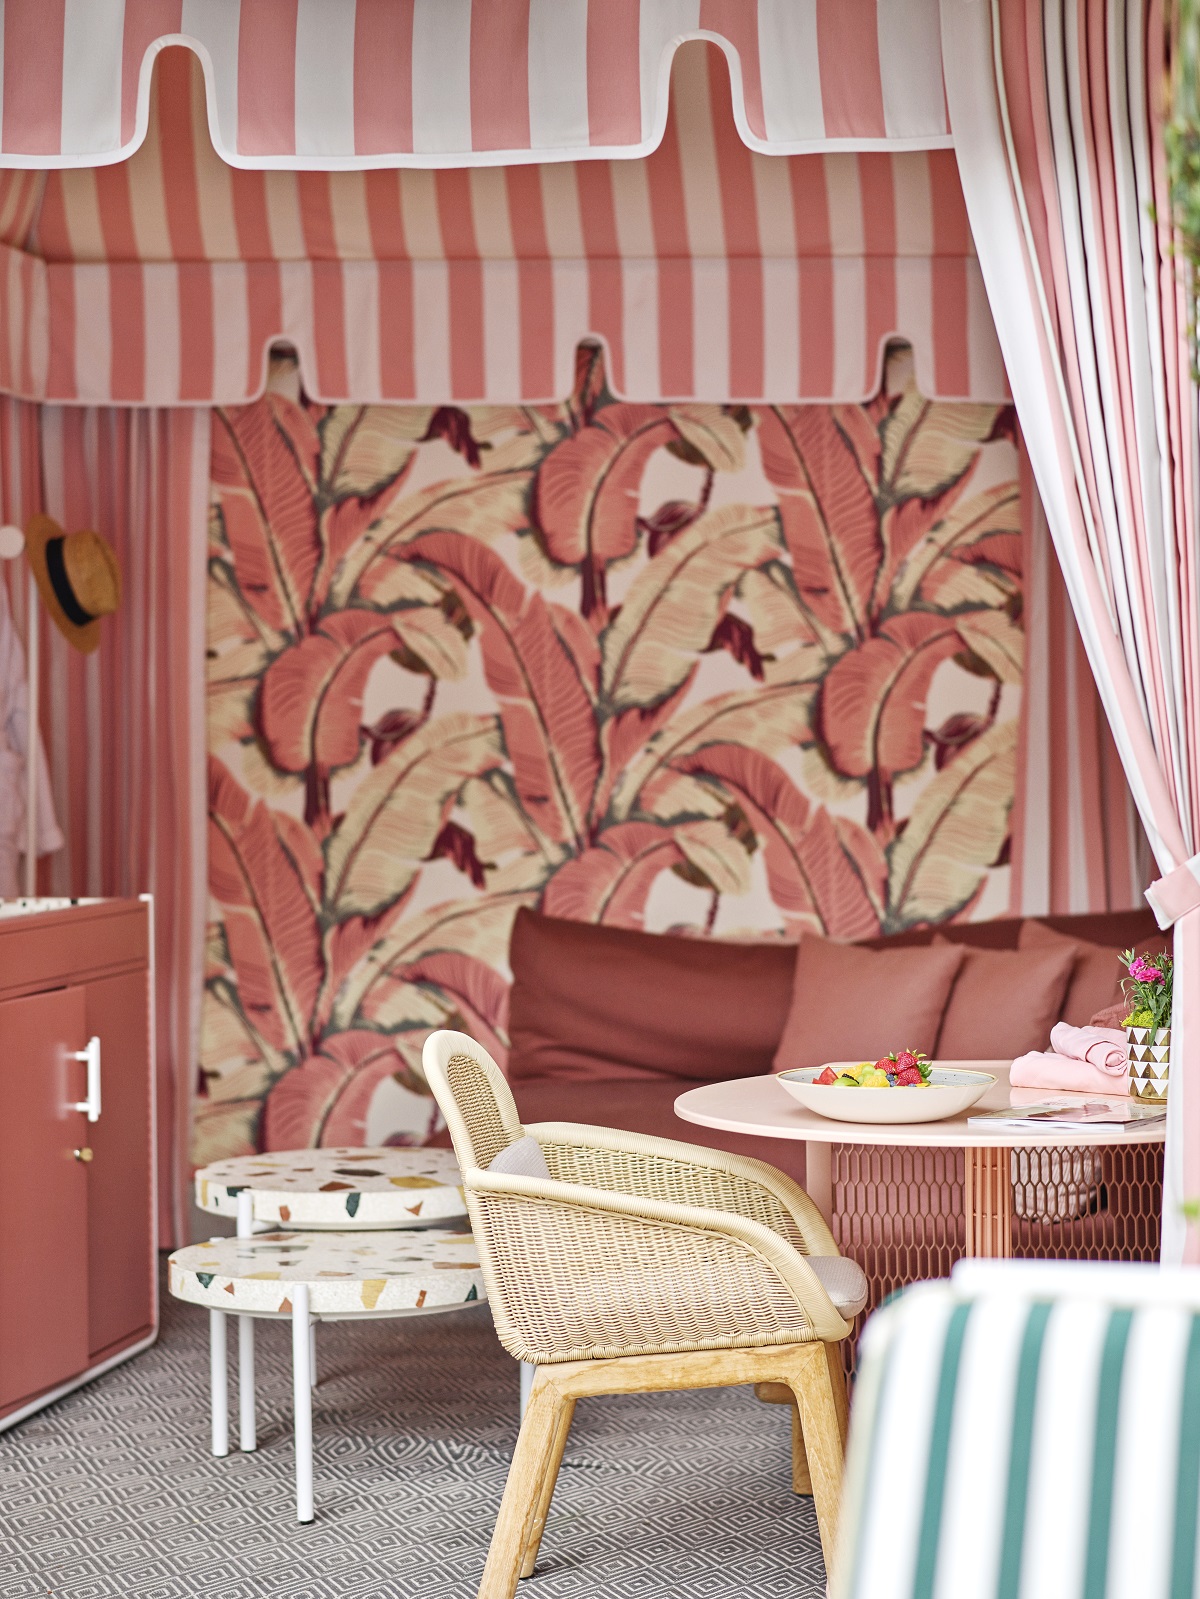 pink banana leaf wallpaper and green striped chairs in the cabana at Beverley Hills Hotel by Champalimaud Designs